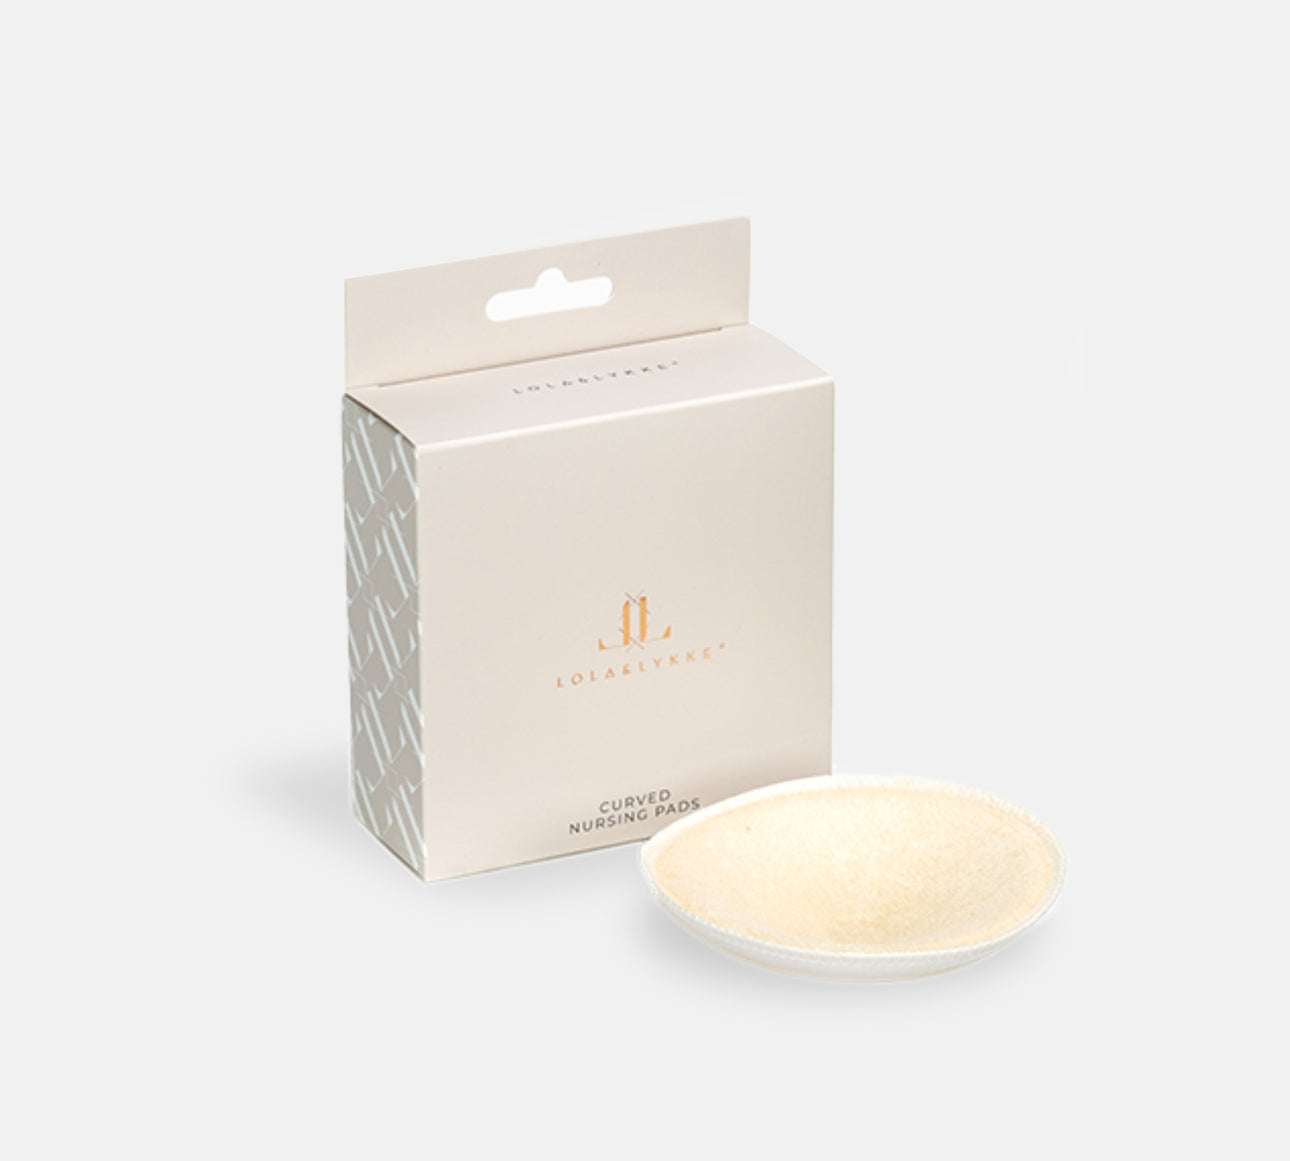 Lola&Lykke Bamboo Nursing Pads - Absorbent and Leakproof